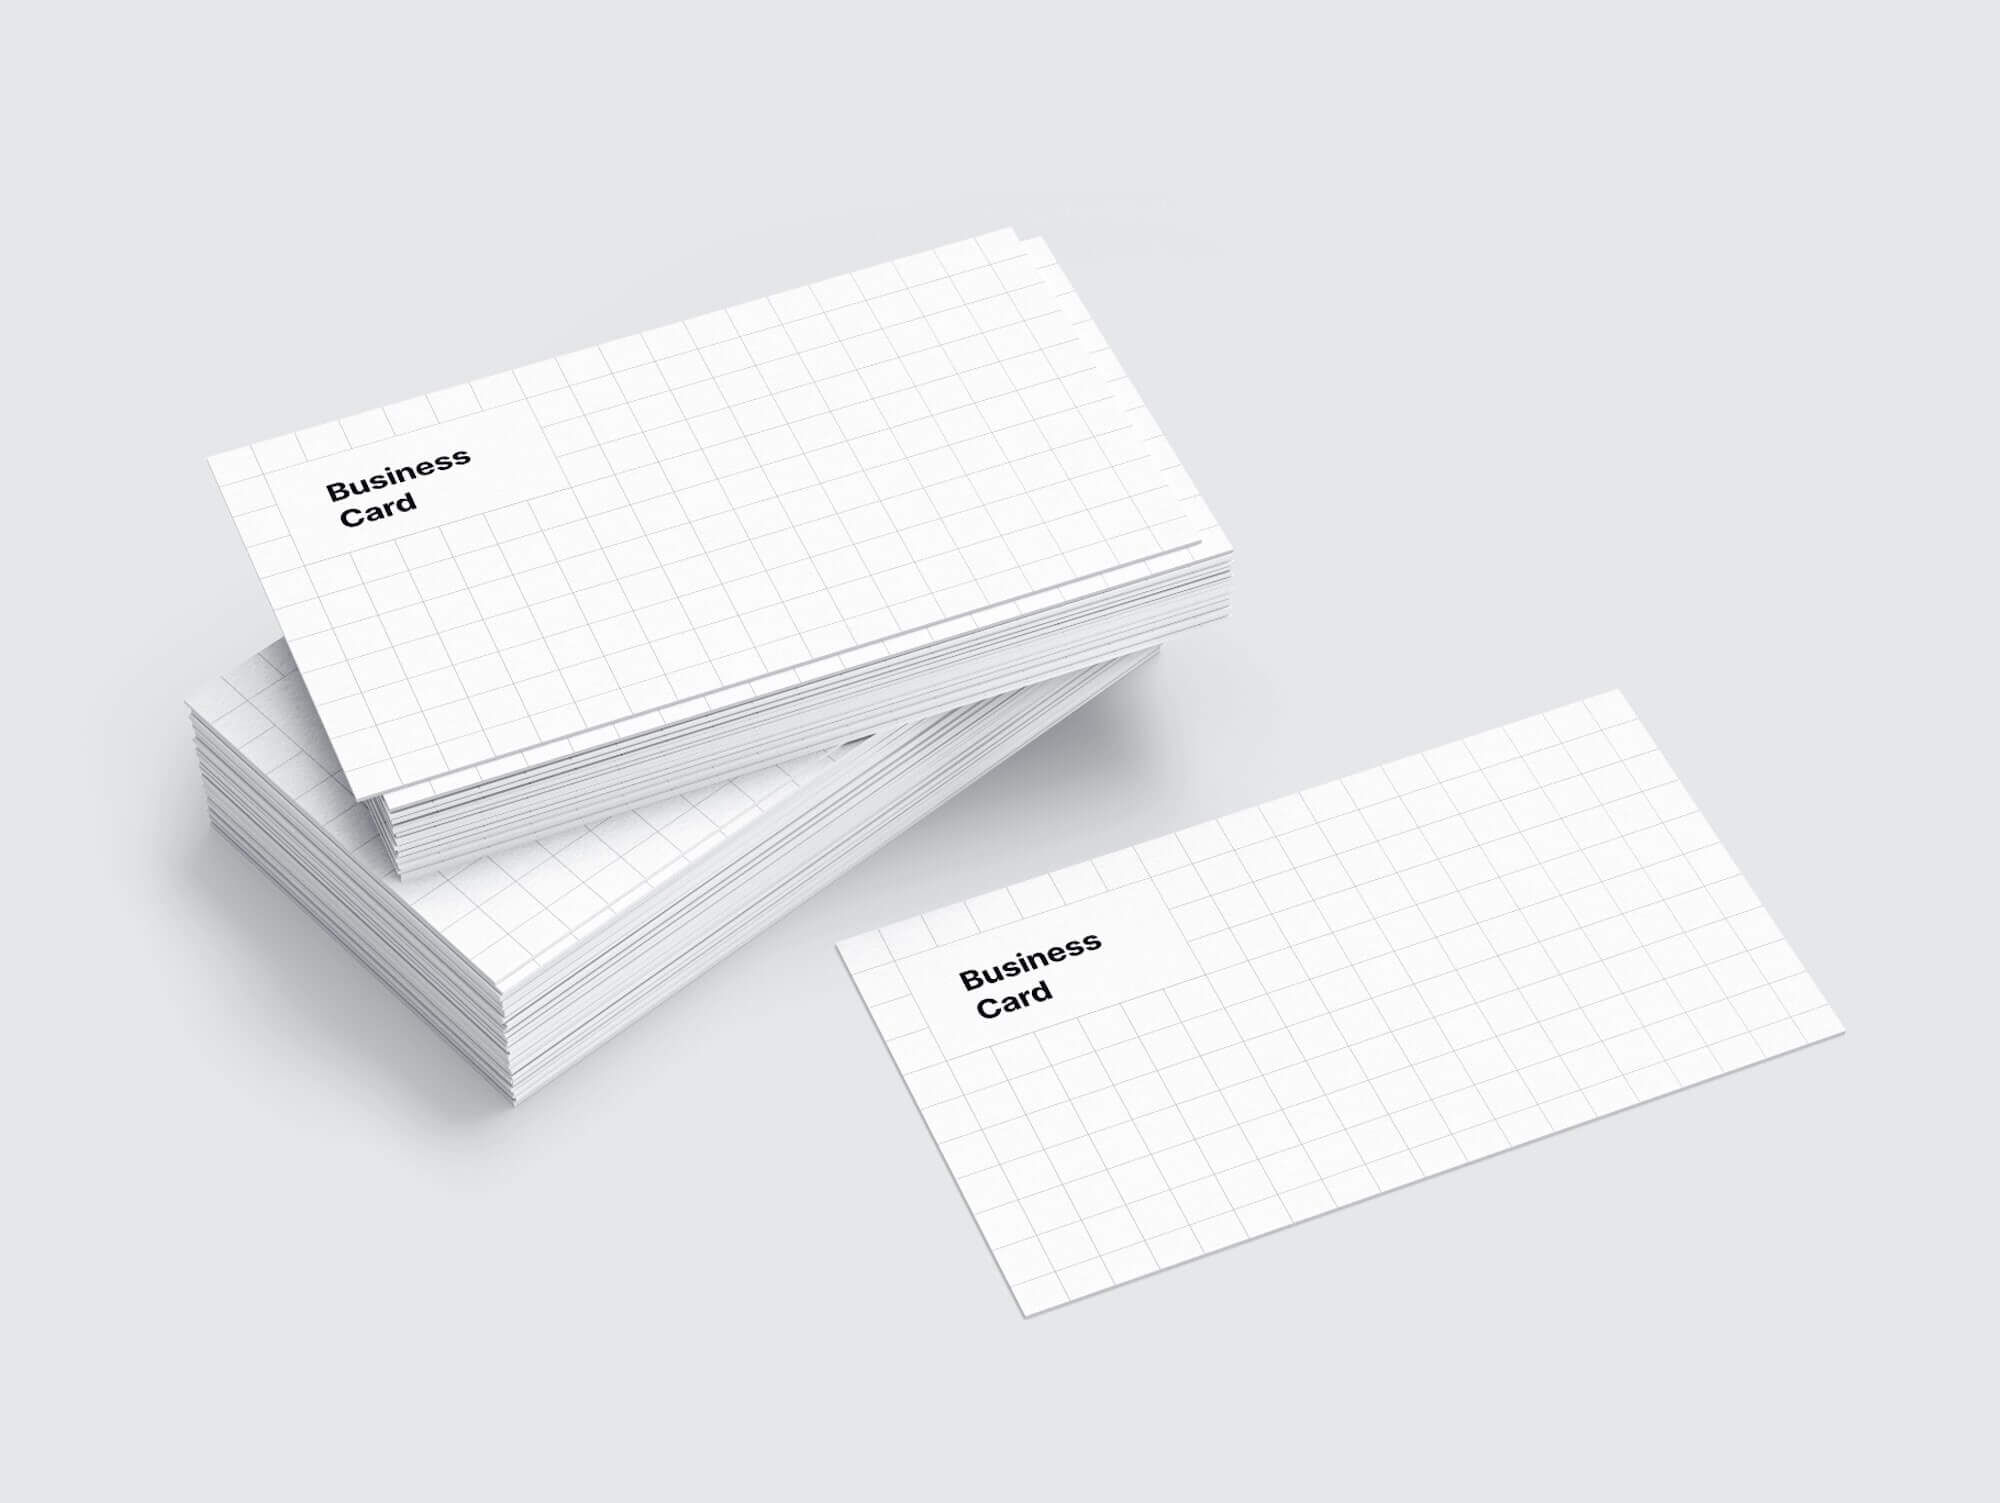 Stacked Business Cards beside Single Card Mockup FREE PSD